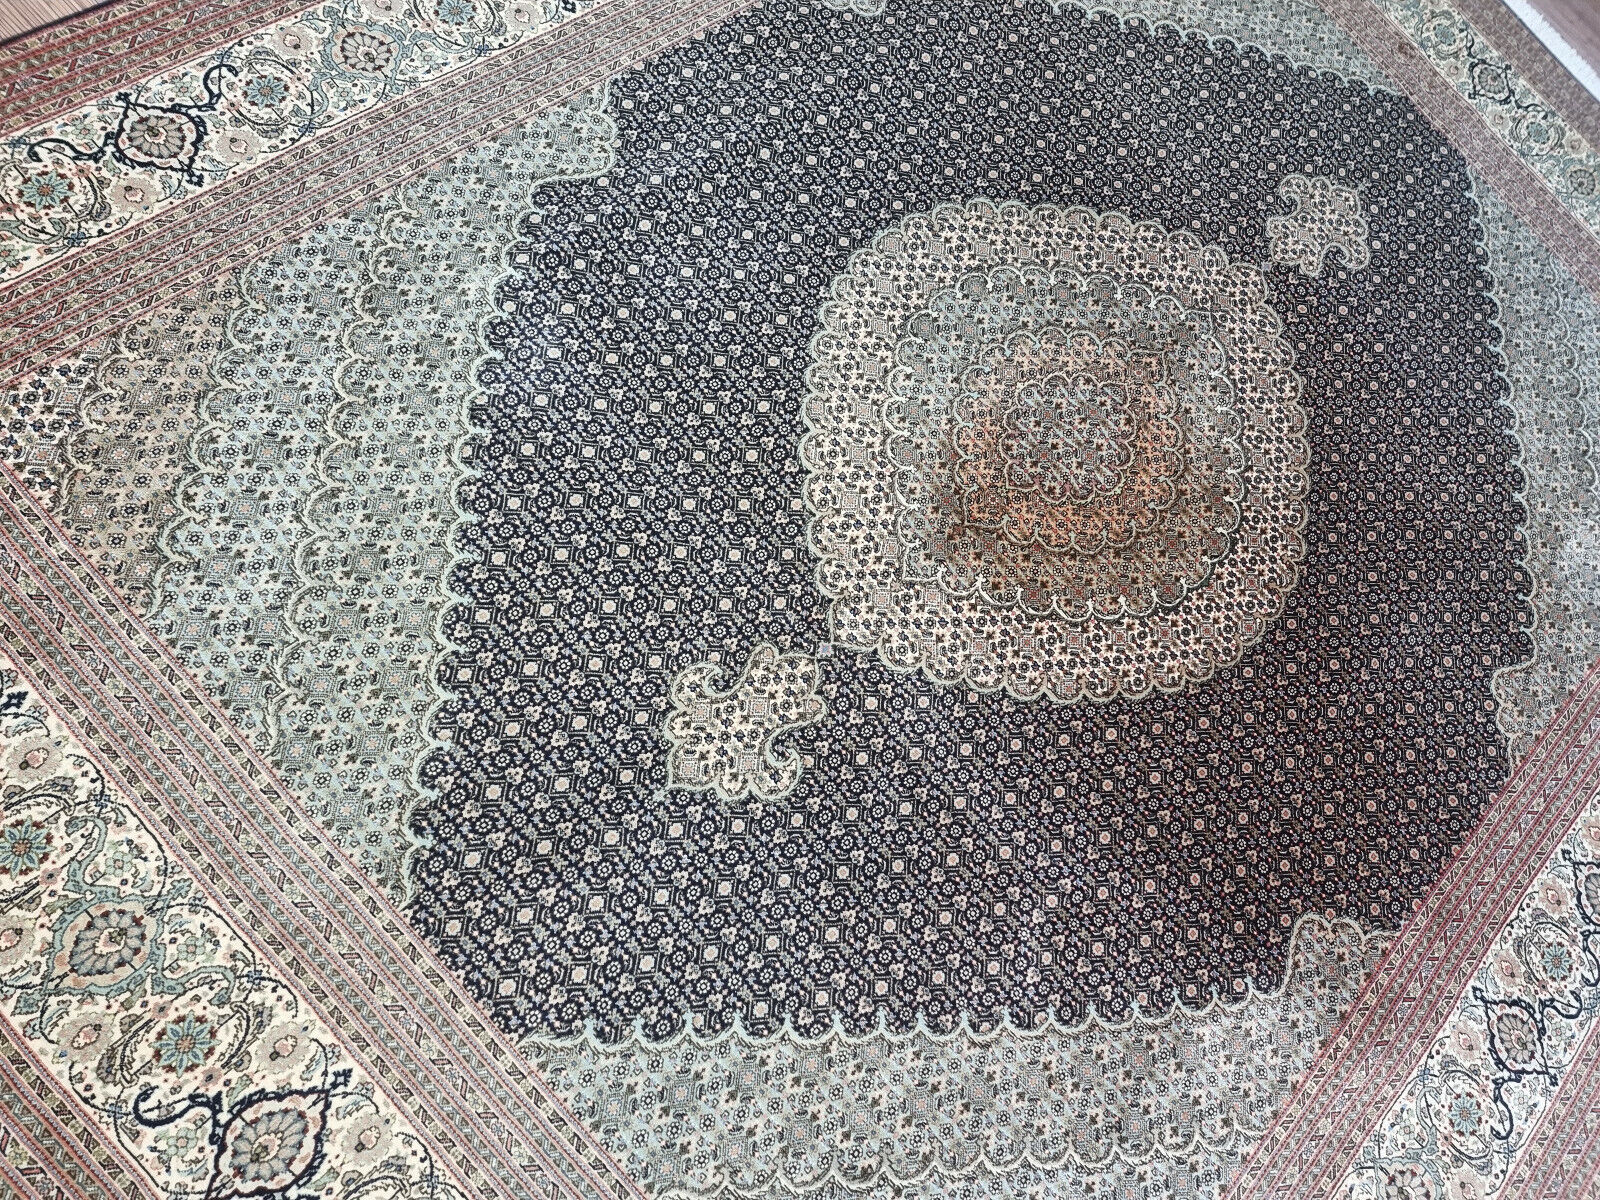 Detailed view of the craftsmanship and quality assurance of the rug